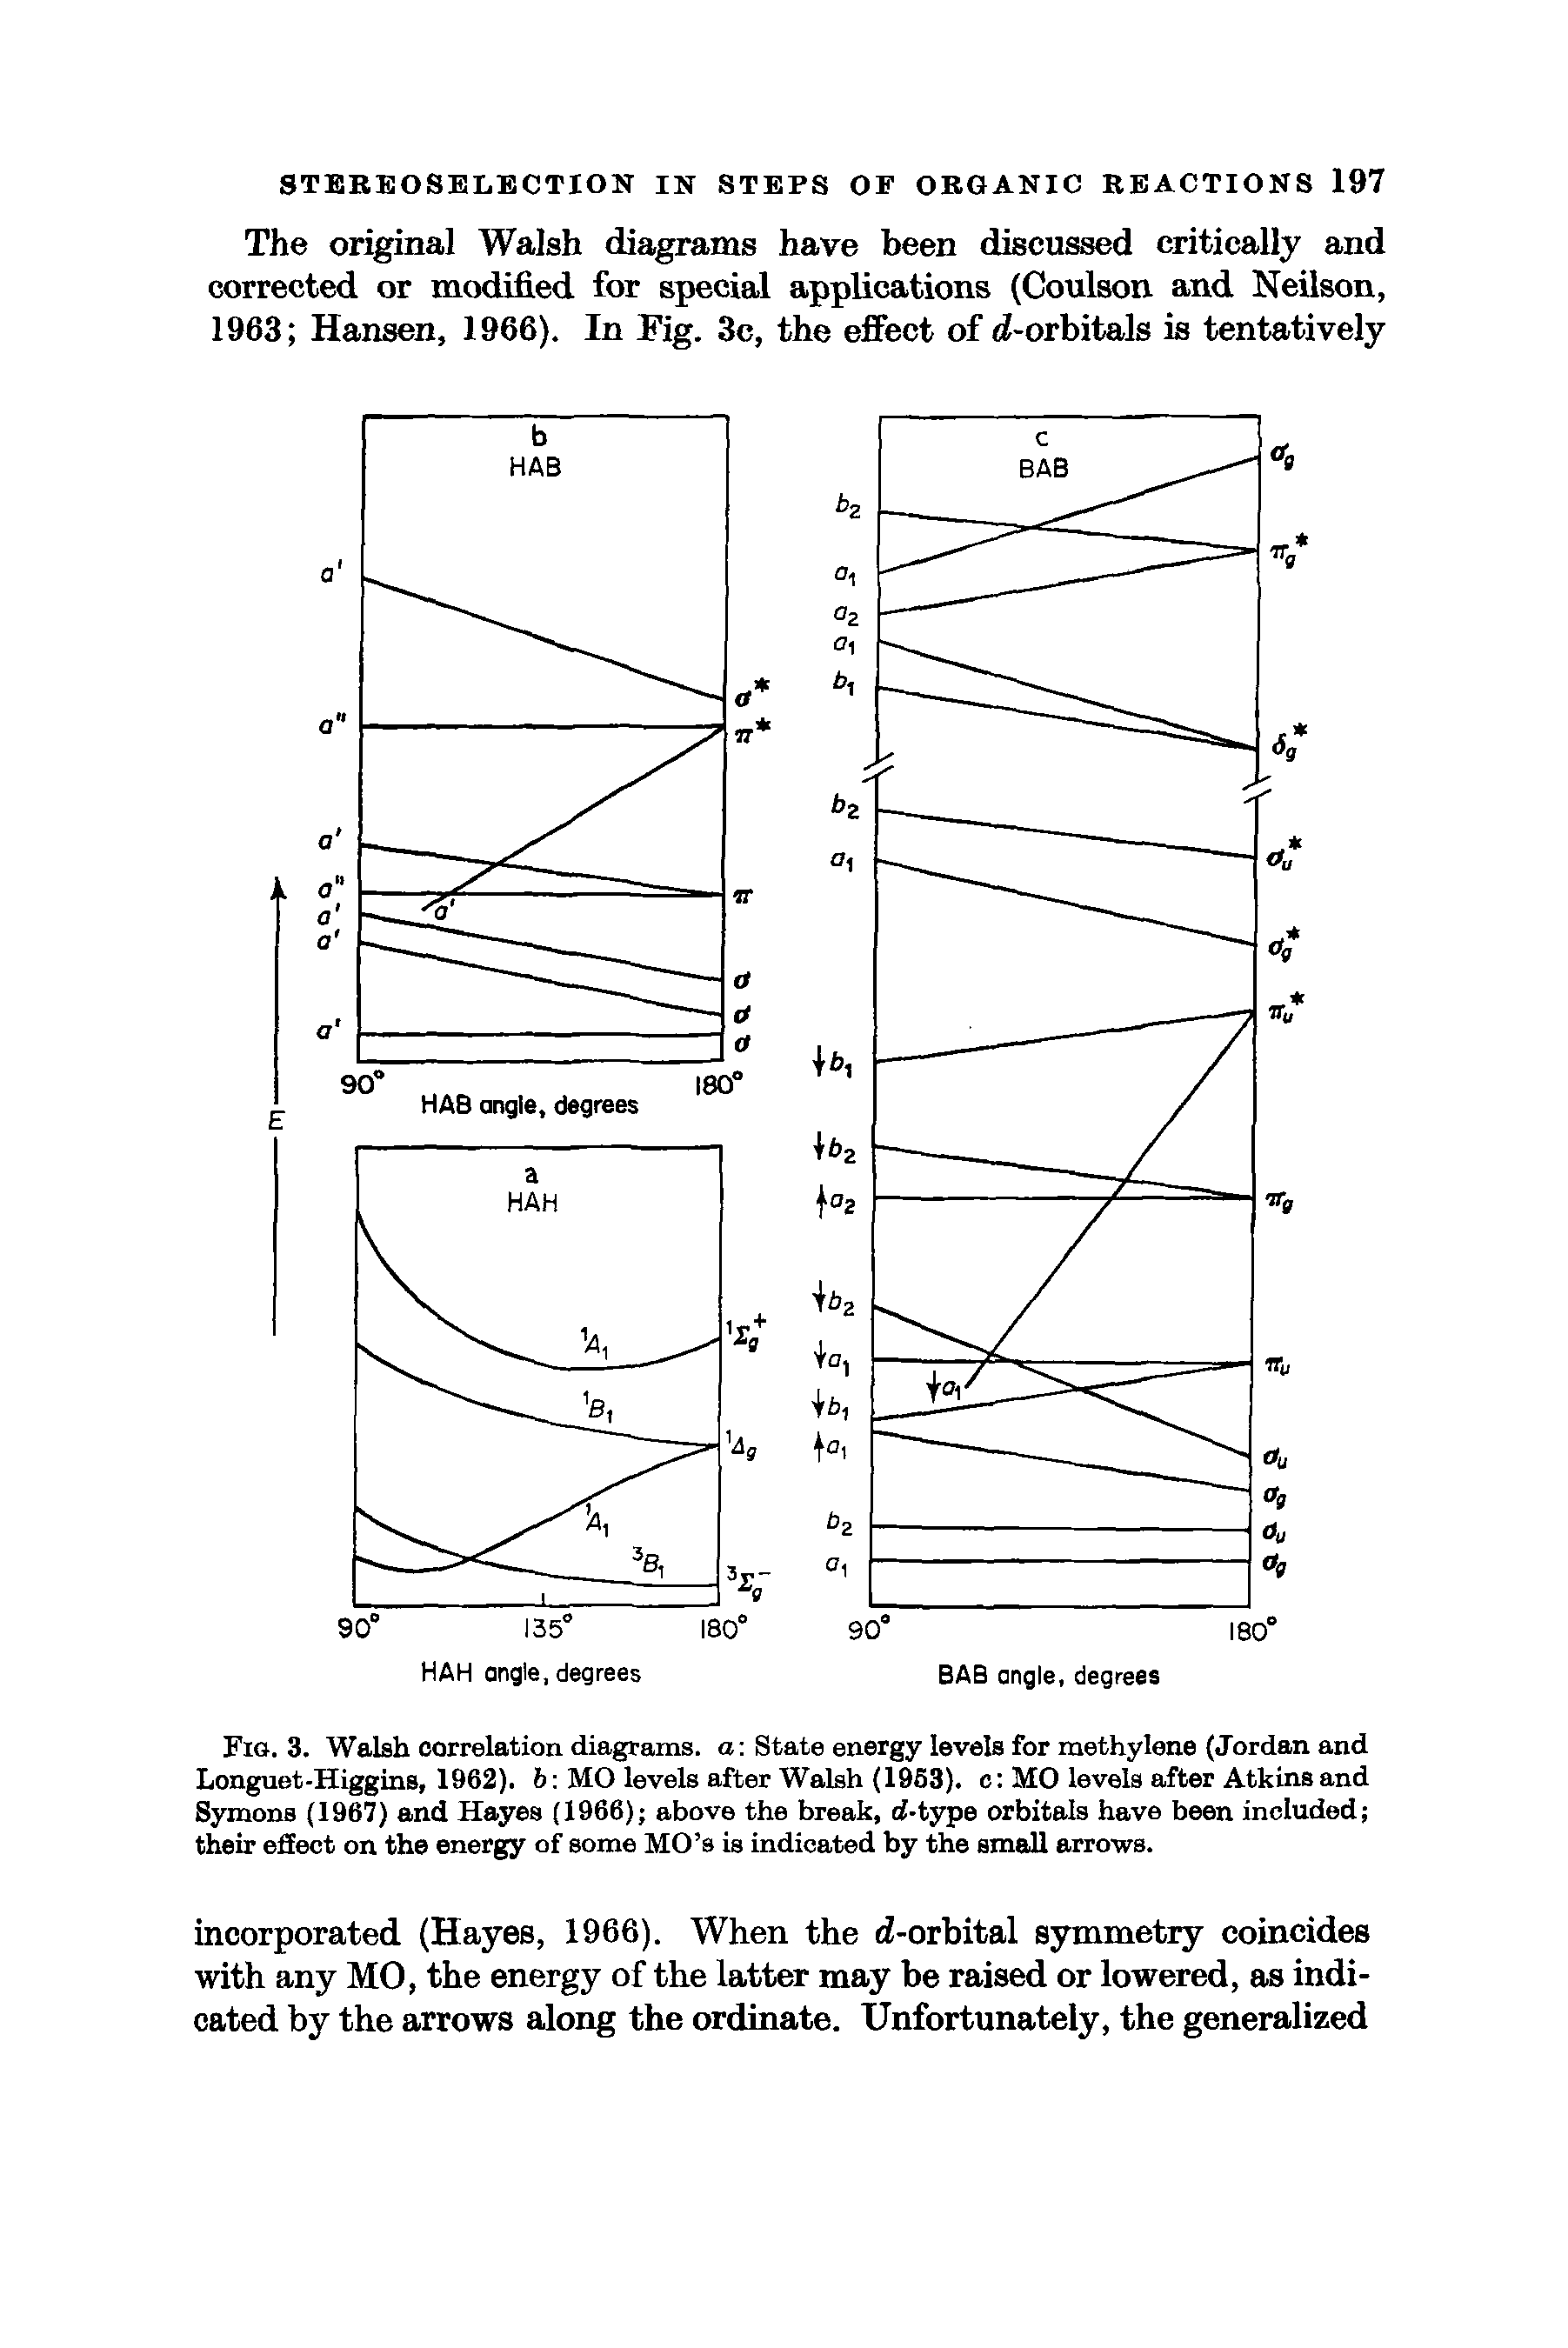 Fig. 3. Walsh correlation diagrams, a State energy levels for methylene (Jordan and Longuet-Higgins, 1962). 6 MO levels after Walsh (1963). c MO levels after Atkins and Symons (1967) and Hayes (1966) above the break, ci-type orbitals have been included their effect on the energy of some MO s is indicated by the small arrows.